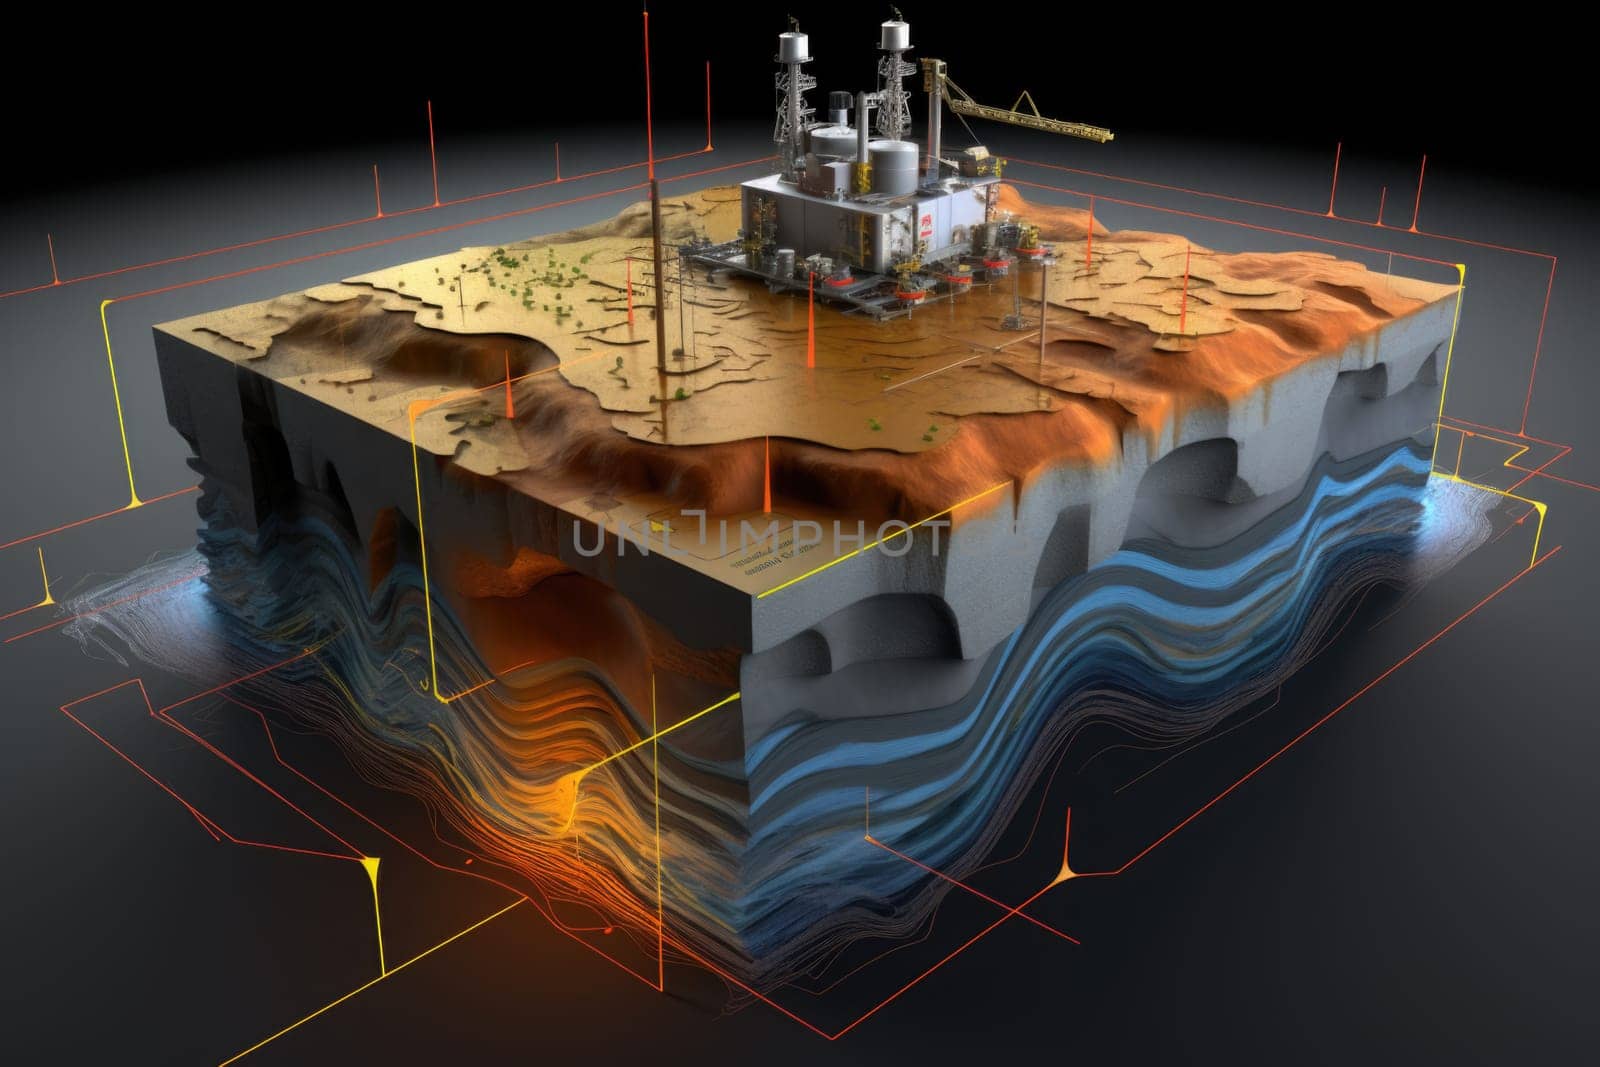 Search for places for oil production. A cross section of the earth. Oil production. Layers of soil. 3d illustration.